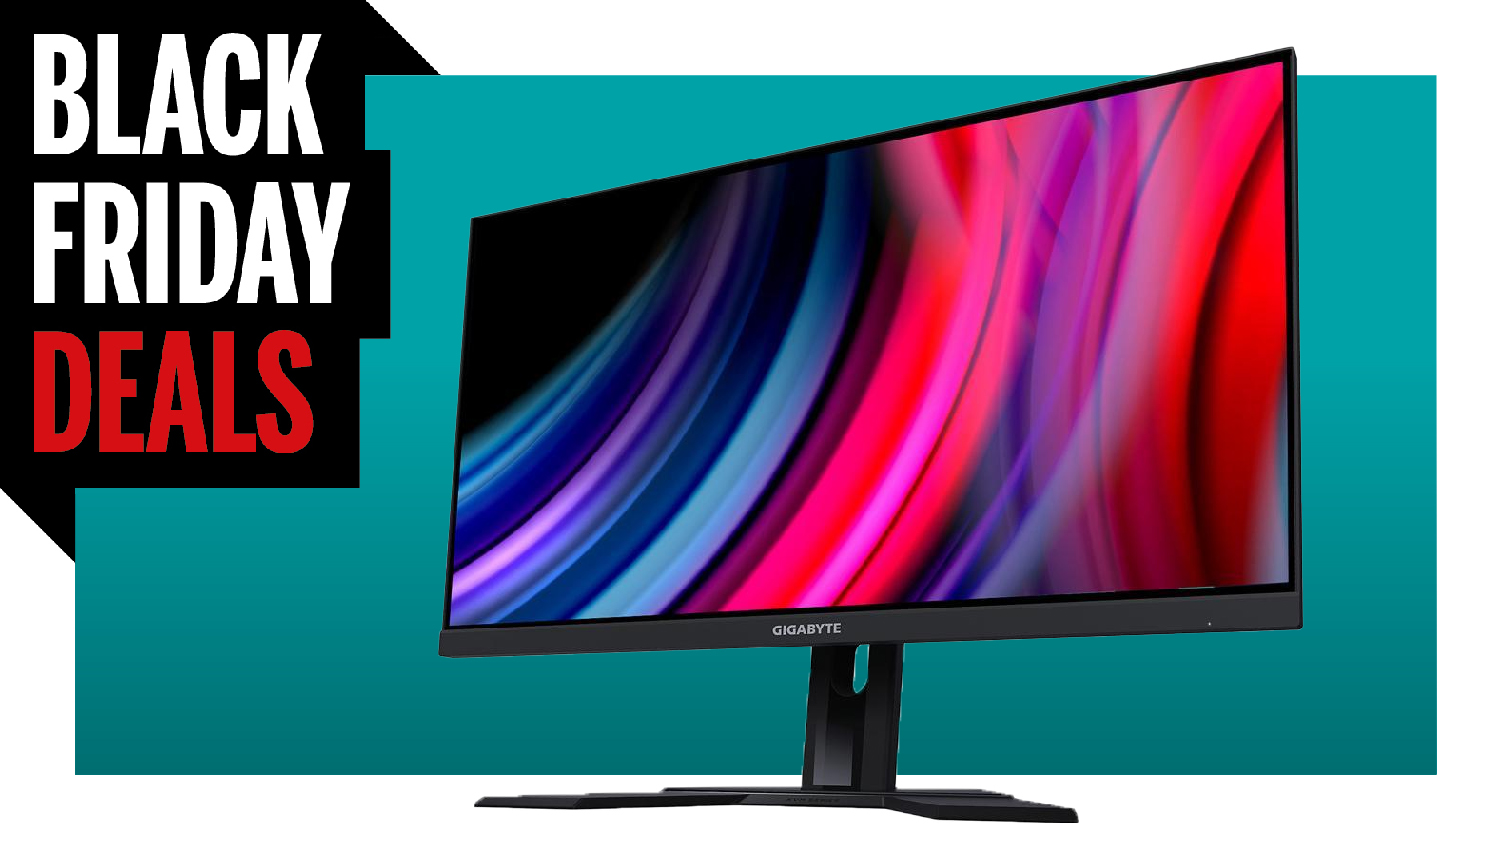  The best Black Friday monitor deal is this fast 1440p IPS display for $280 